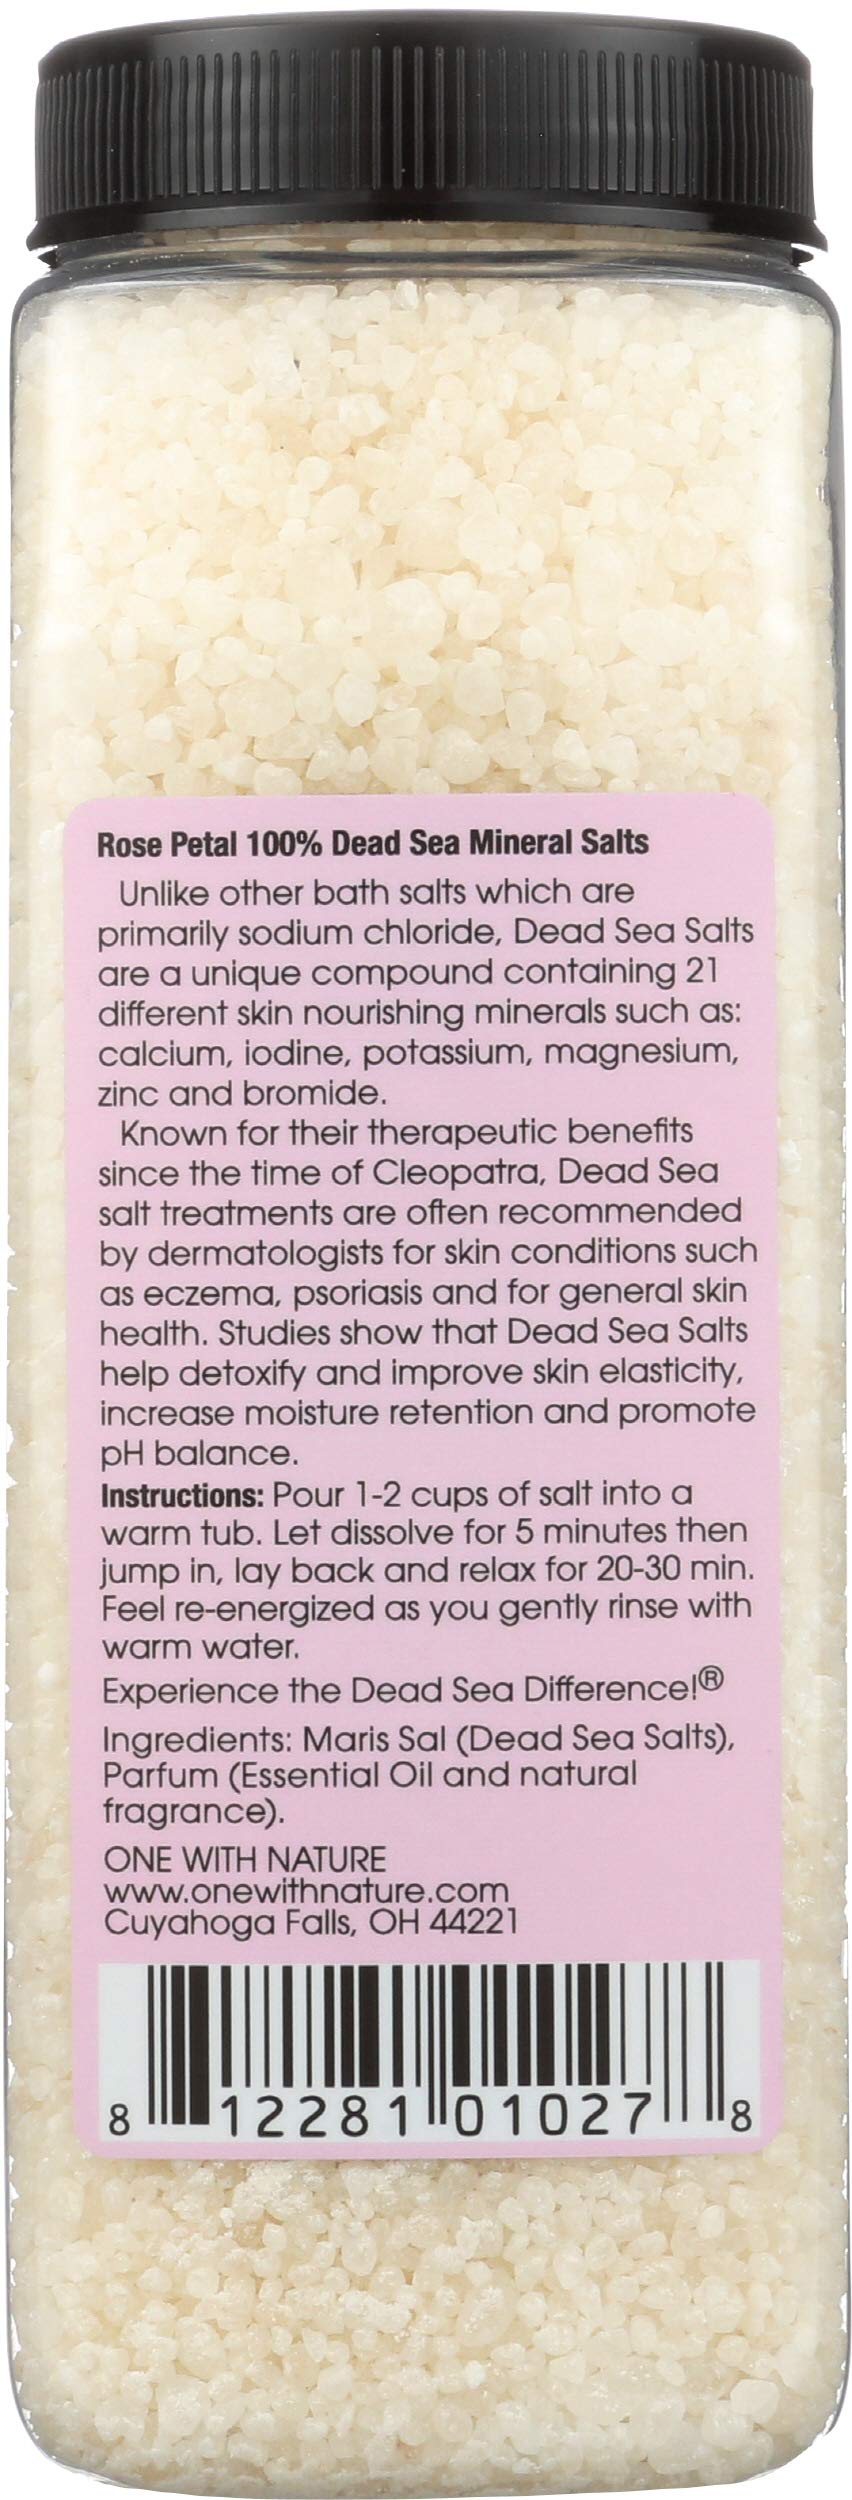 One With Nature Rose Petal Scent Bath Salts, 32 Ounces (Pack Of 6)